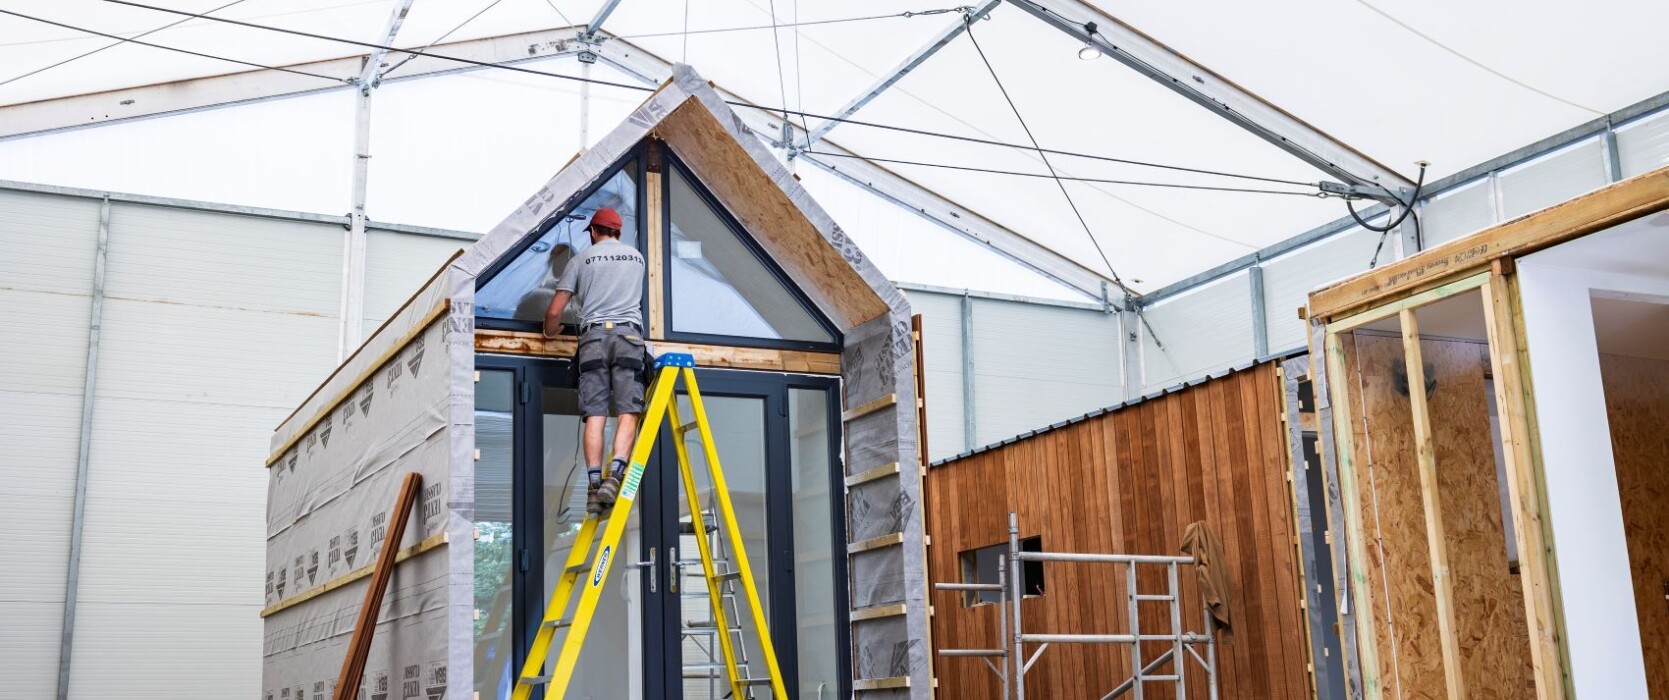 Temporary workshop for manufacturing glamping pods